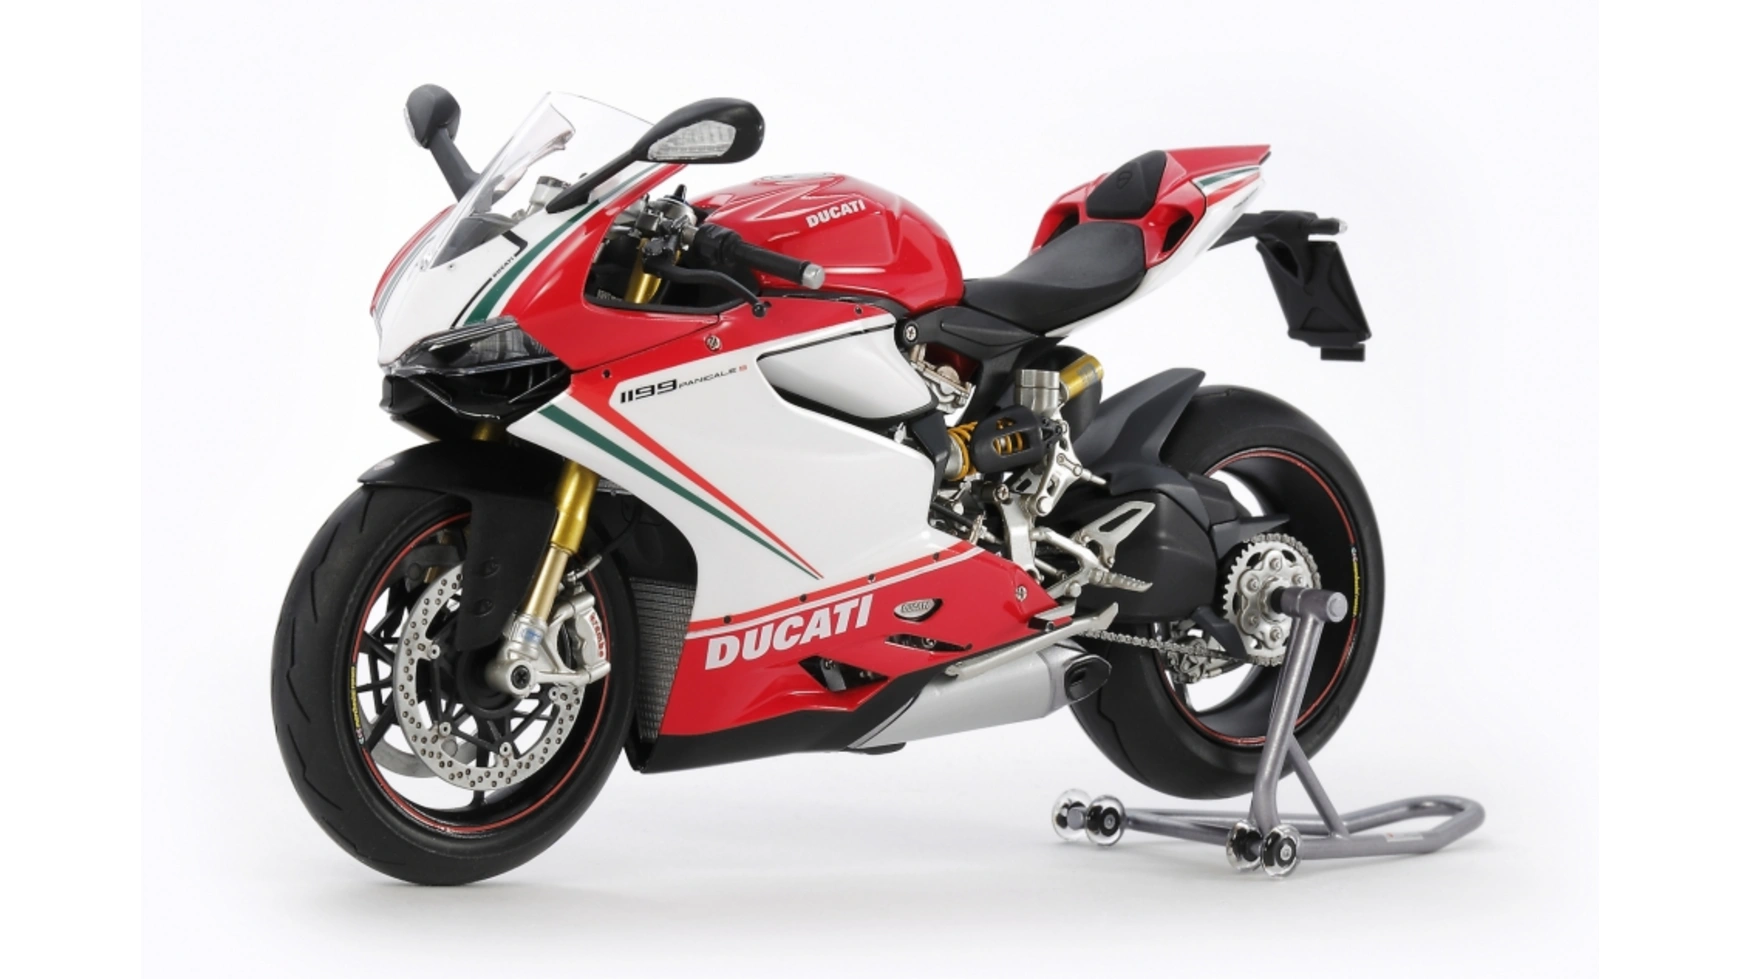 Tamiya 1:12 Ducati 1199 Panigale S Tricolore for ducati 899 959 1199 1199s 1299 panigale sr panigale v4 aluminum motorcycle 7 8 22mm handlebar brake clutch levers protector